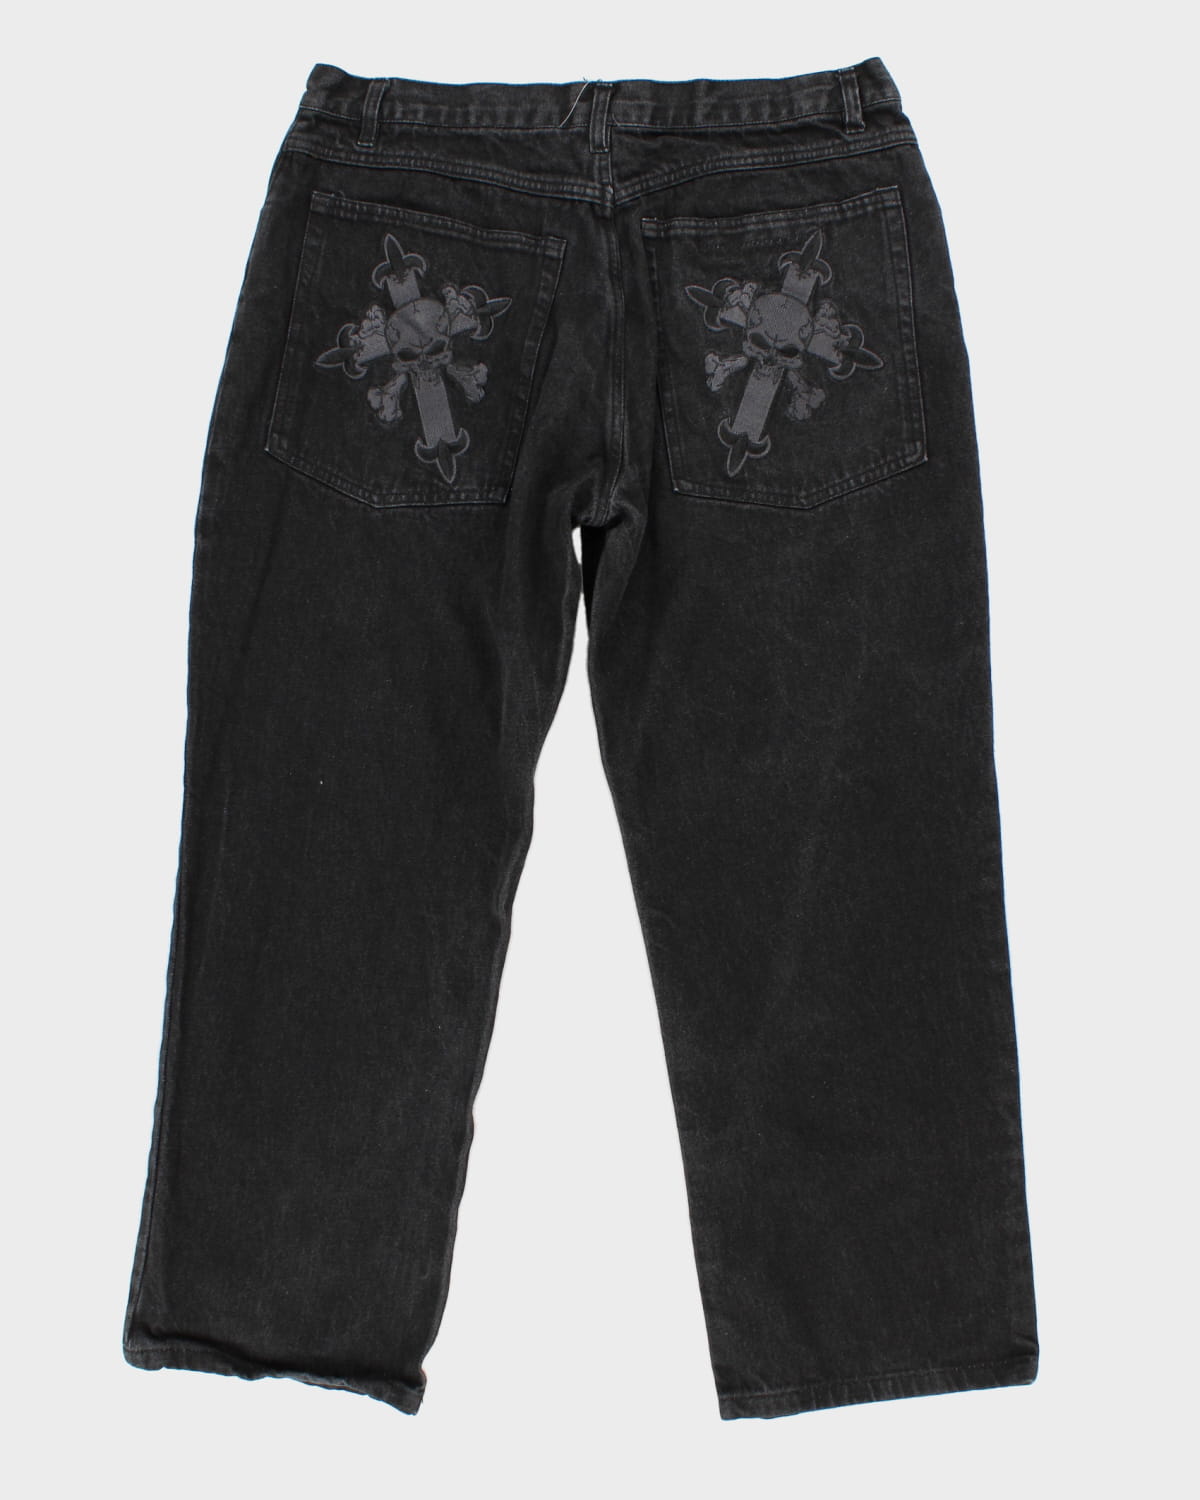 Vision Streetwear Skull Embroidered Black Jeans - W38 L27